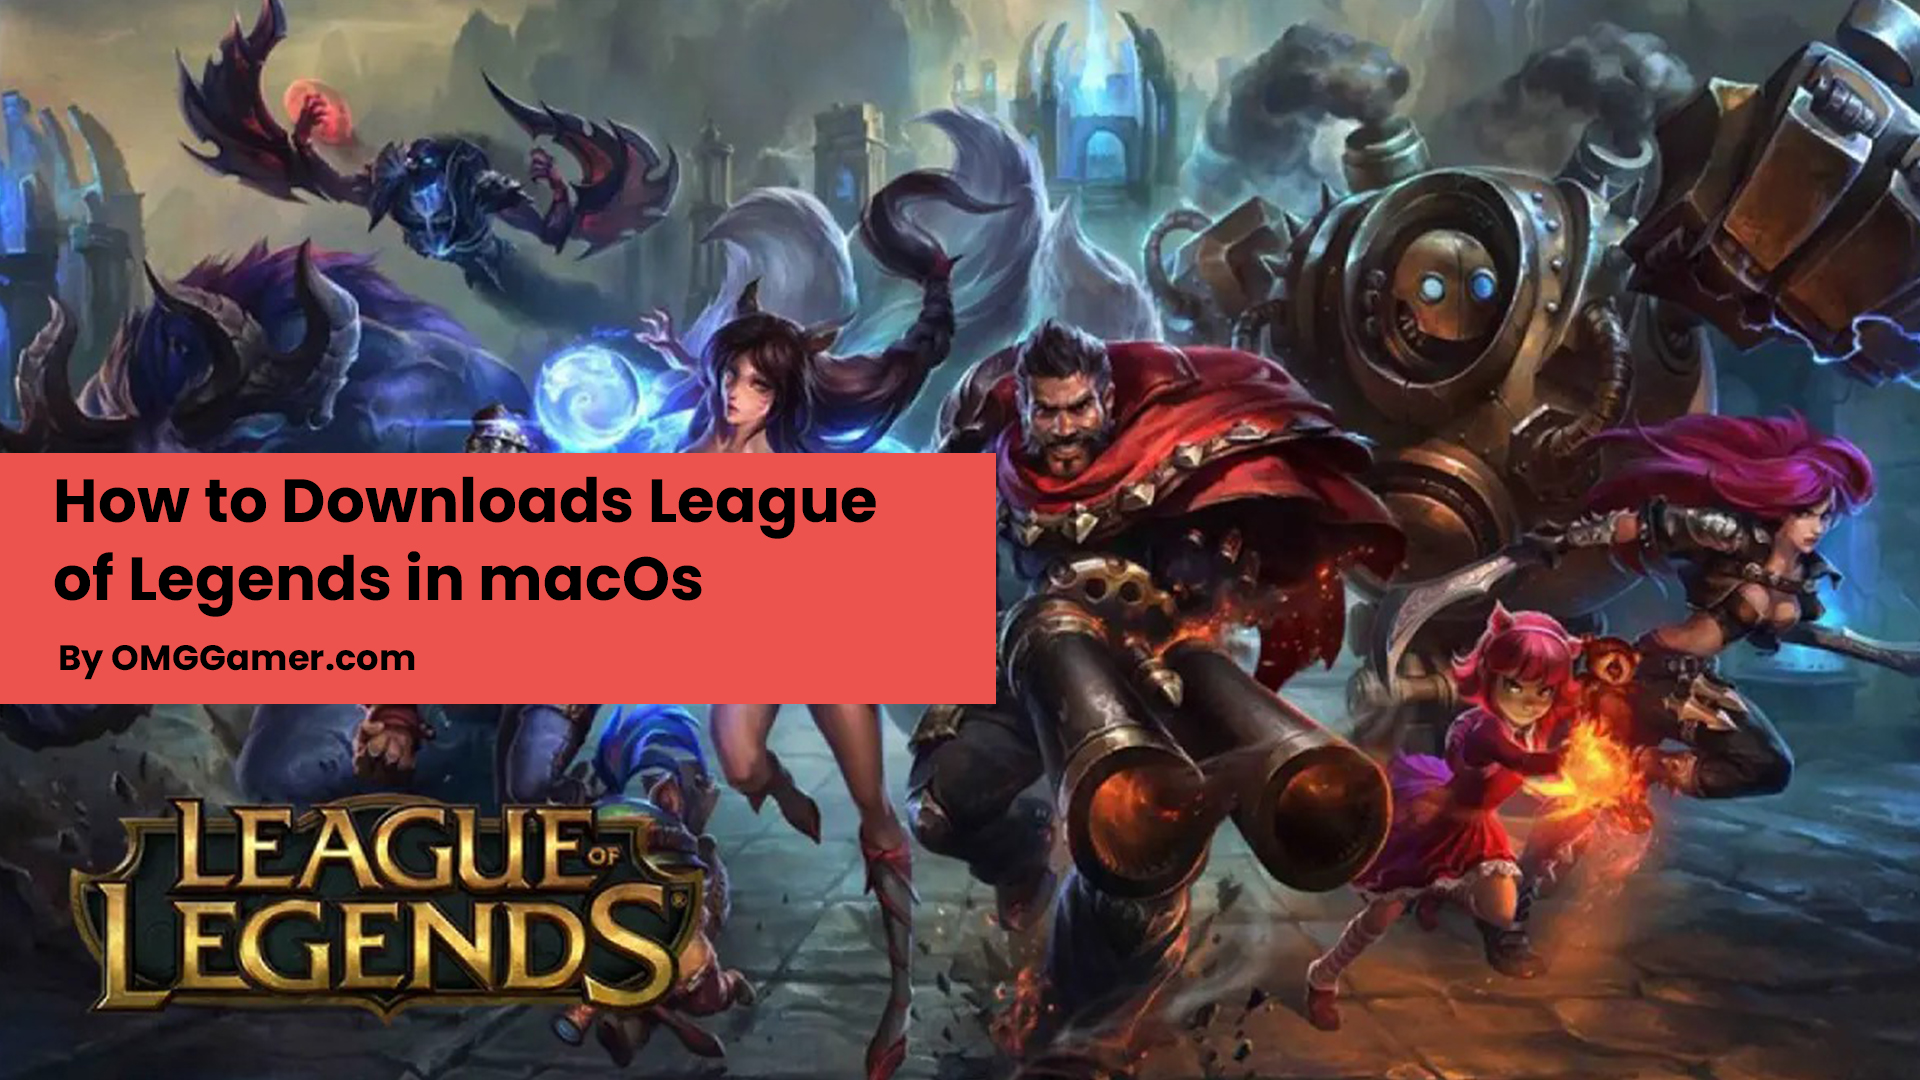 How to Downloads League of Legends in macOs